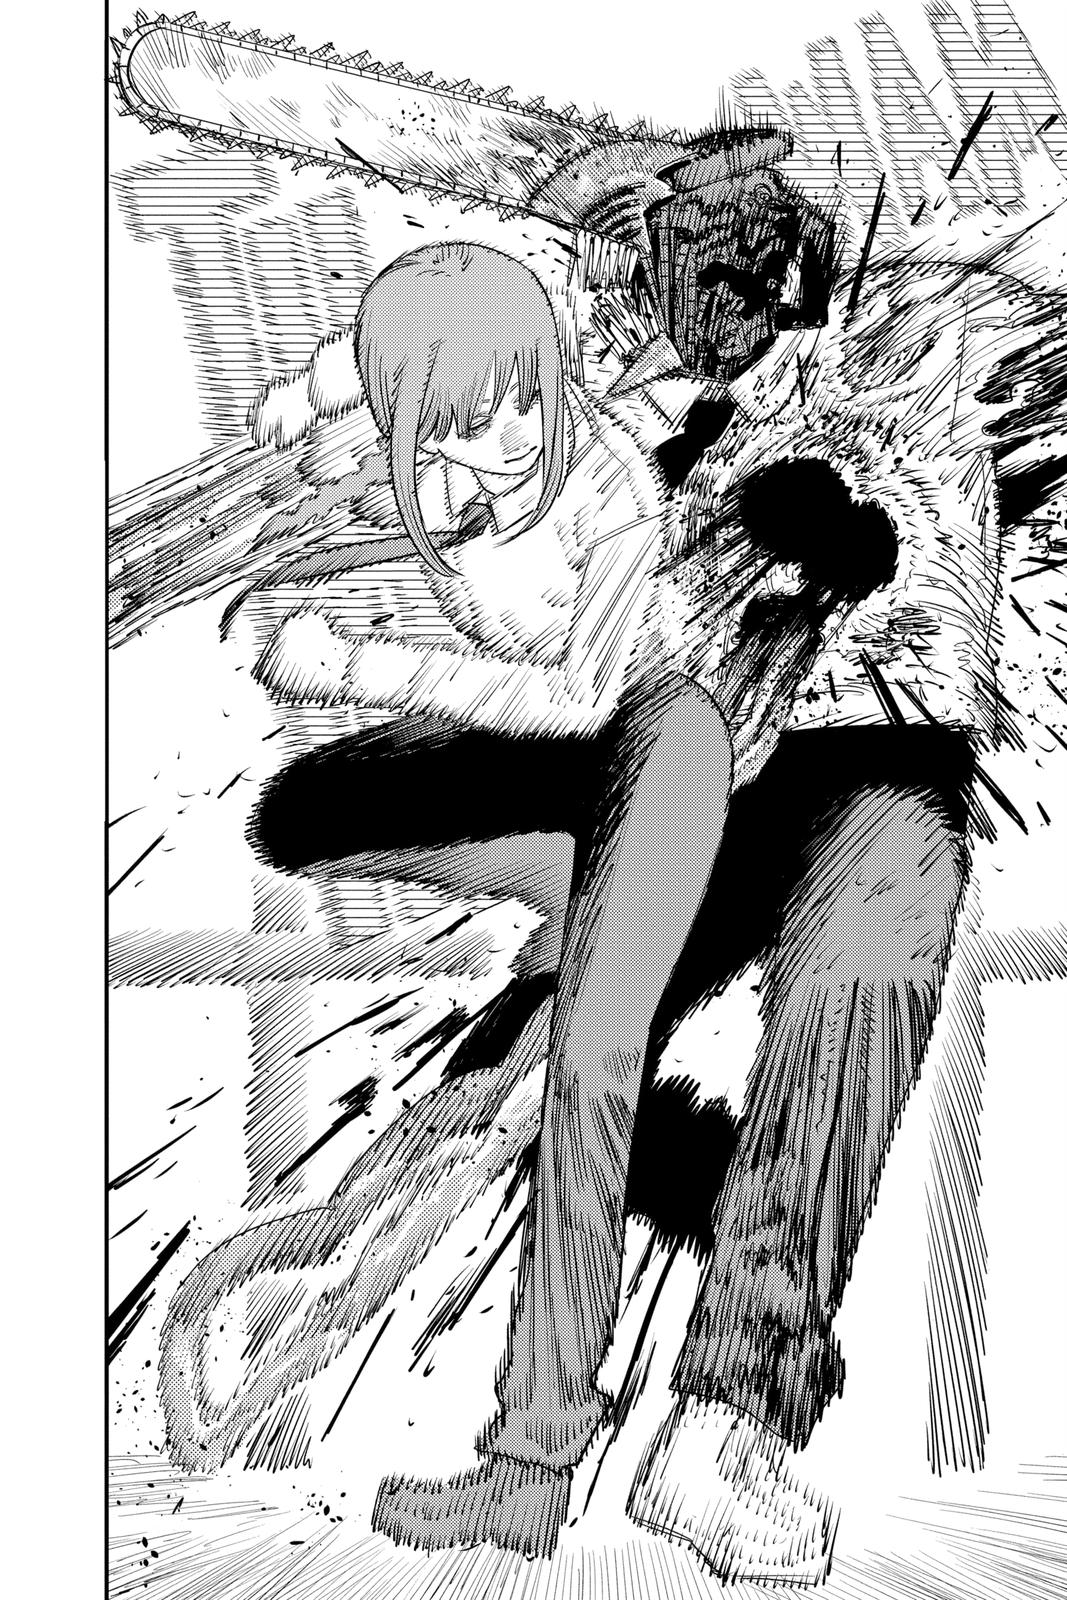 Chainsaw Man Chapter 95 Tears Towards a Conclusion - Jump Time #54 –  OTAQUEST